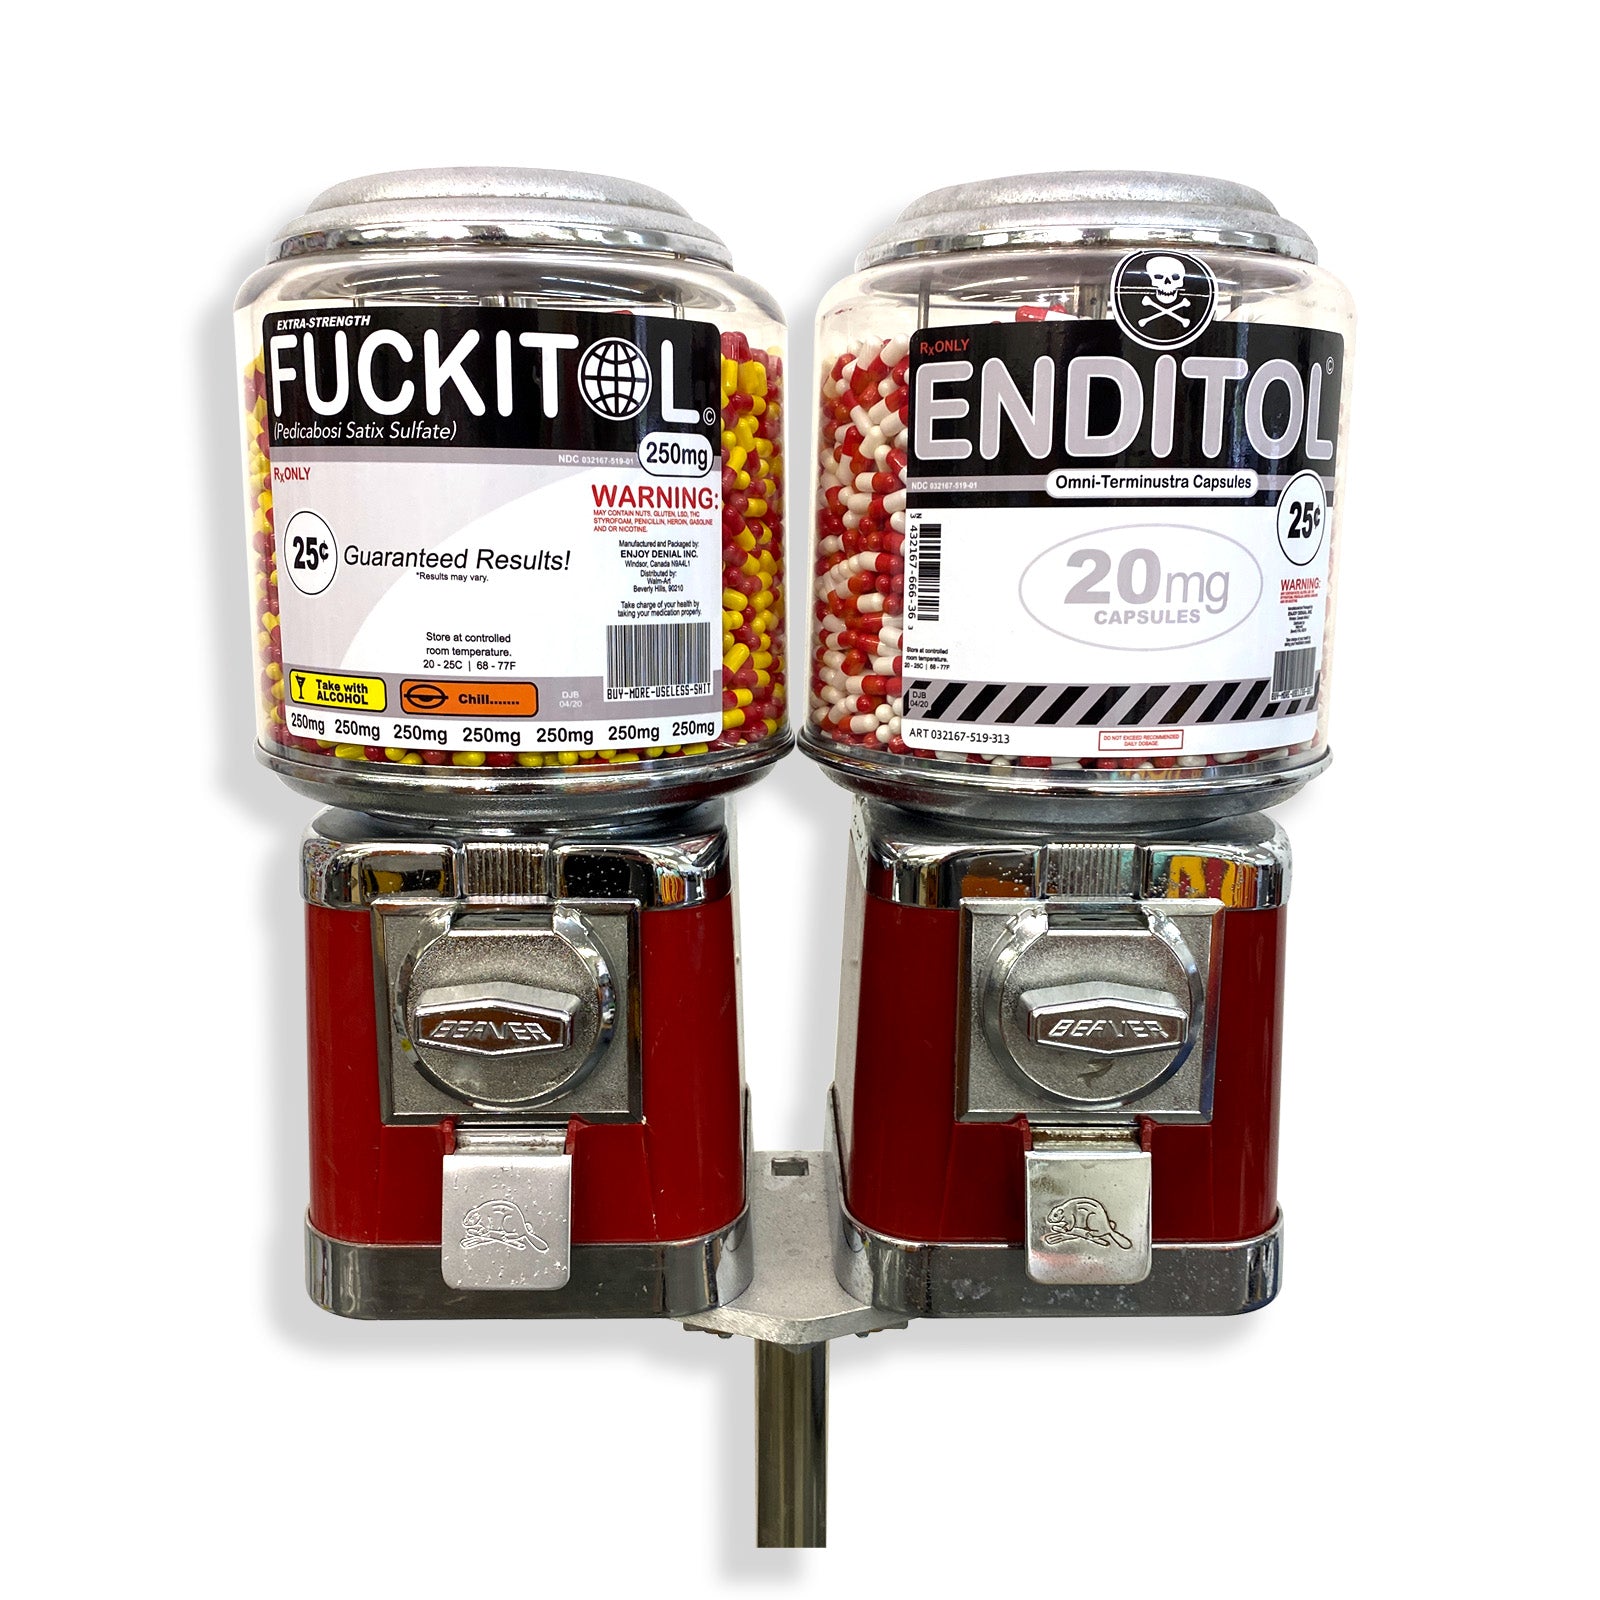 FUCKITOL, ENDITOL - Galerie Station 16